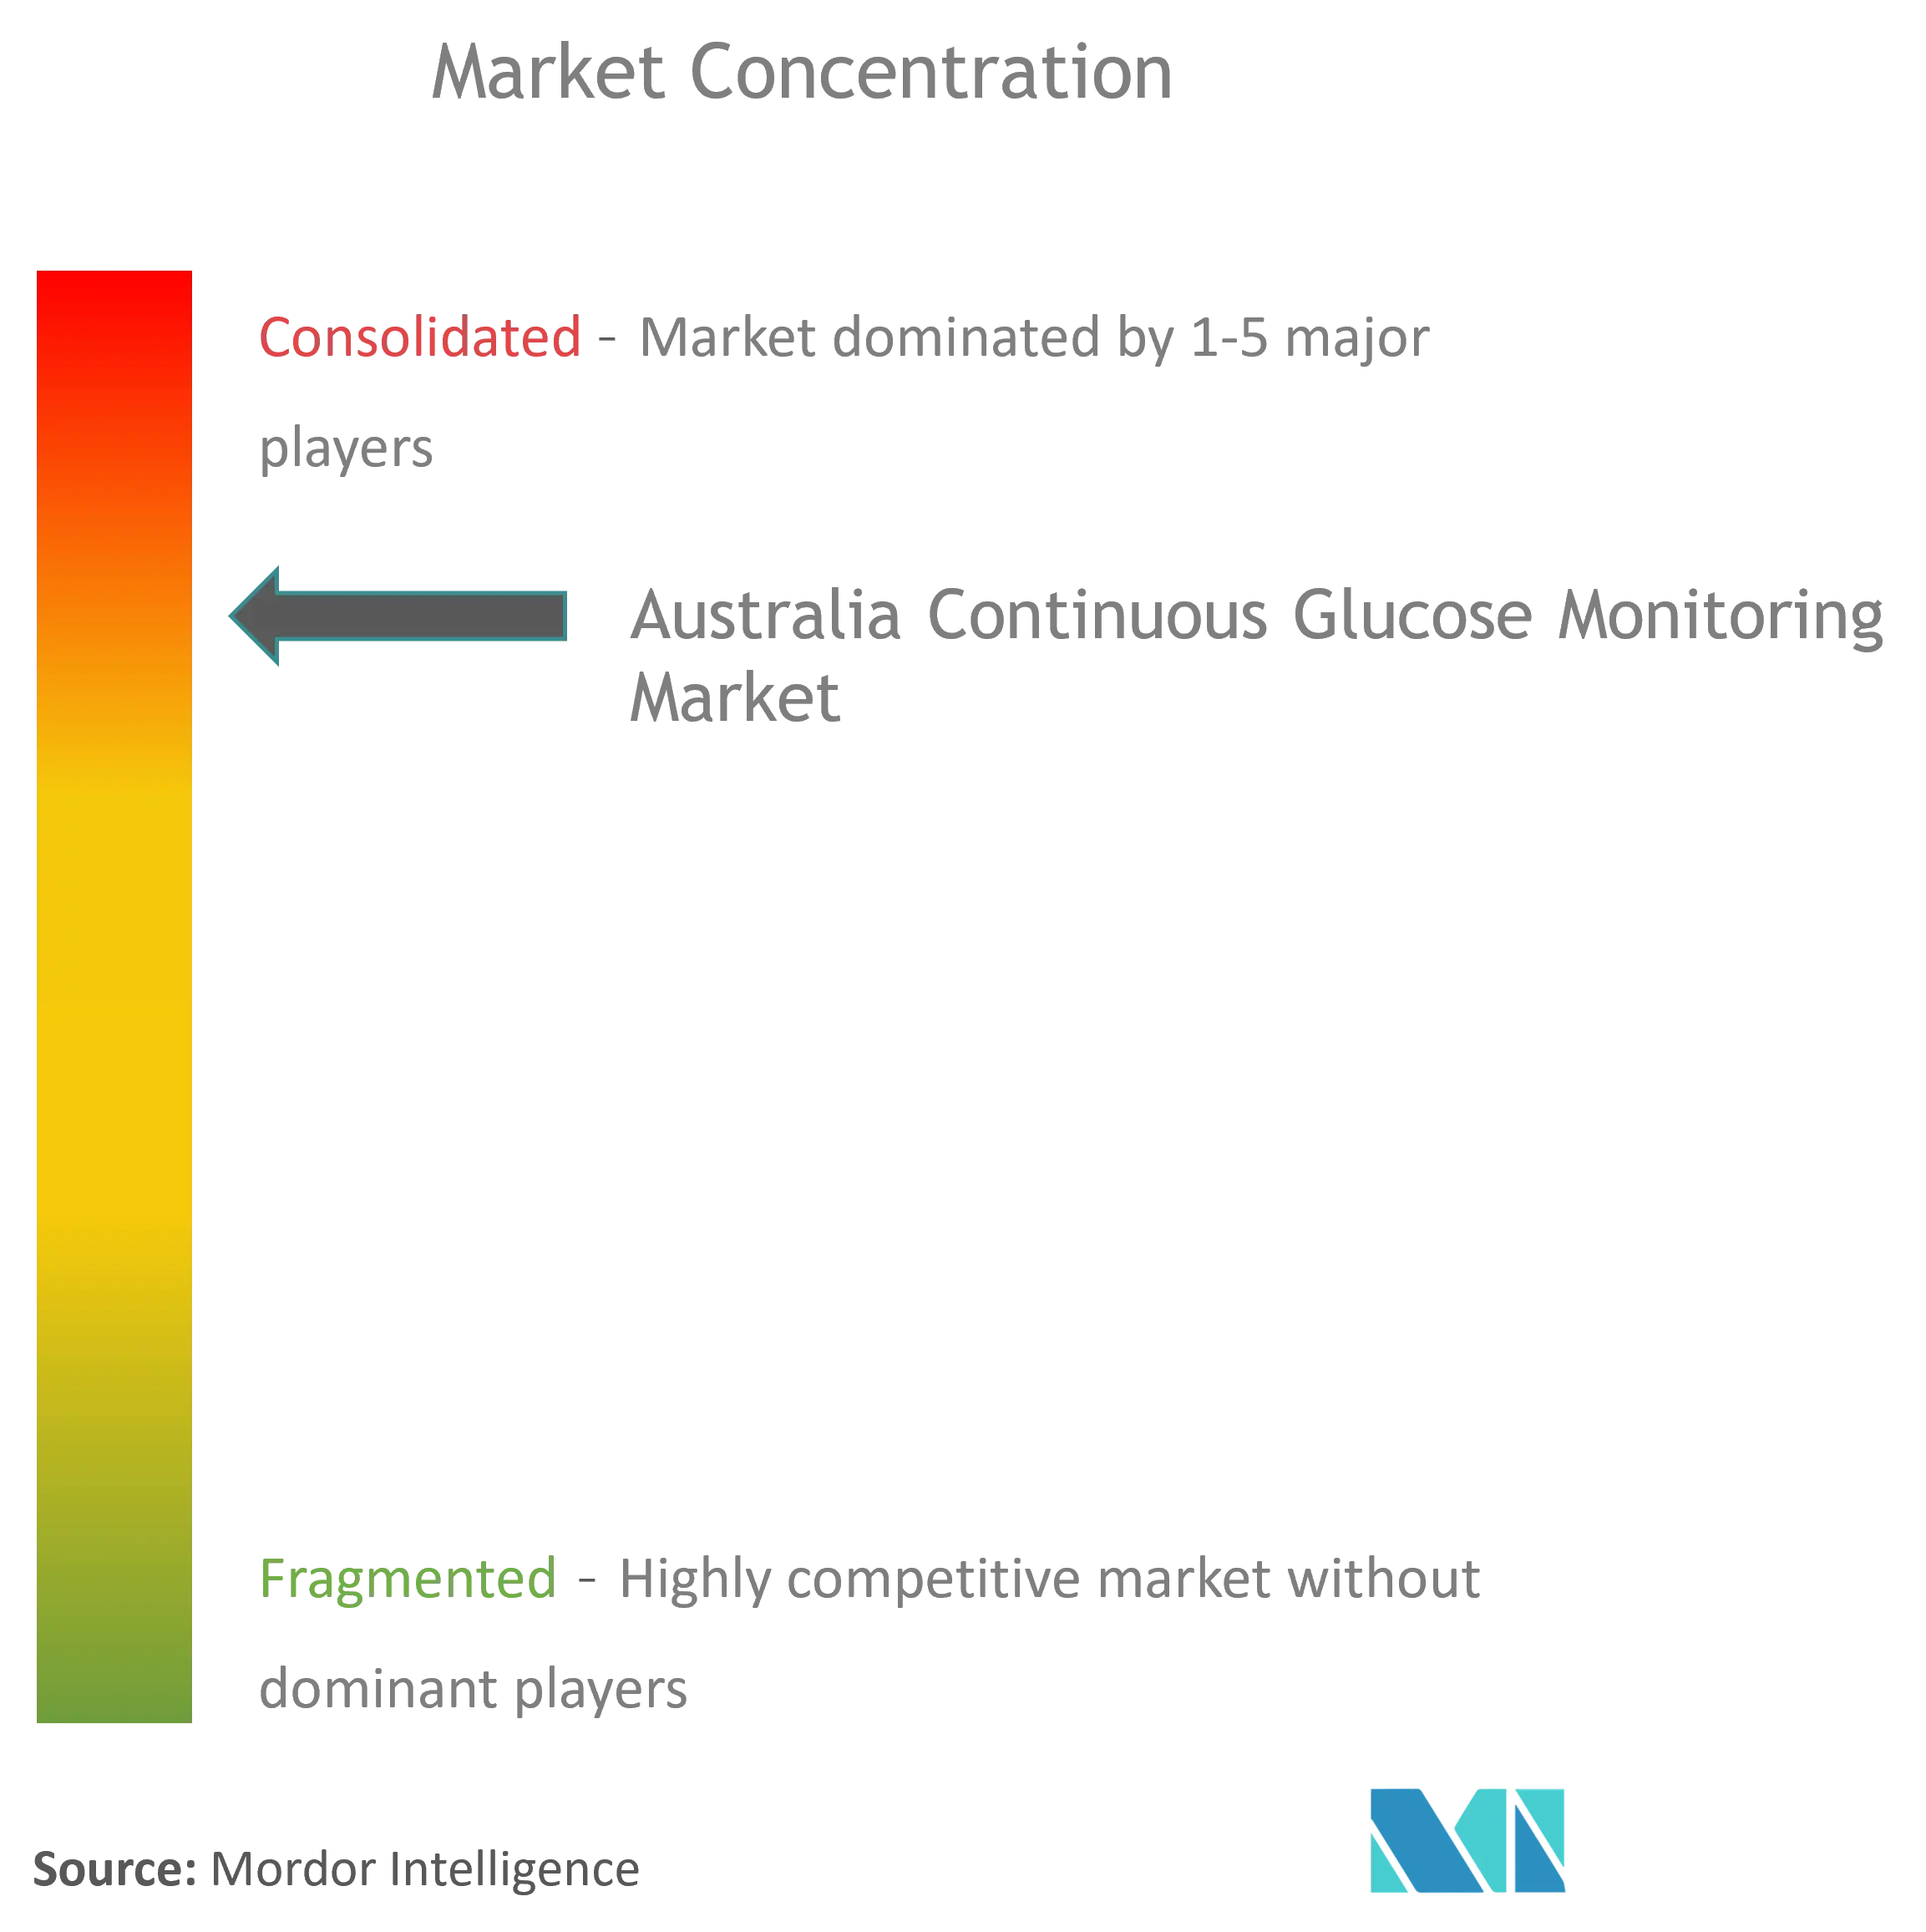 Australia Continuous Glucose Monitoring Devices Market Concentration